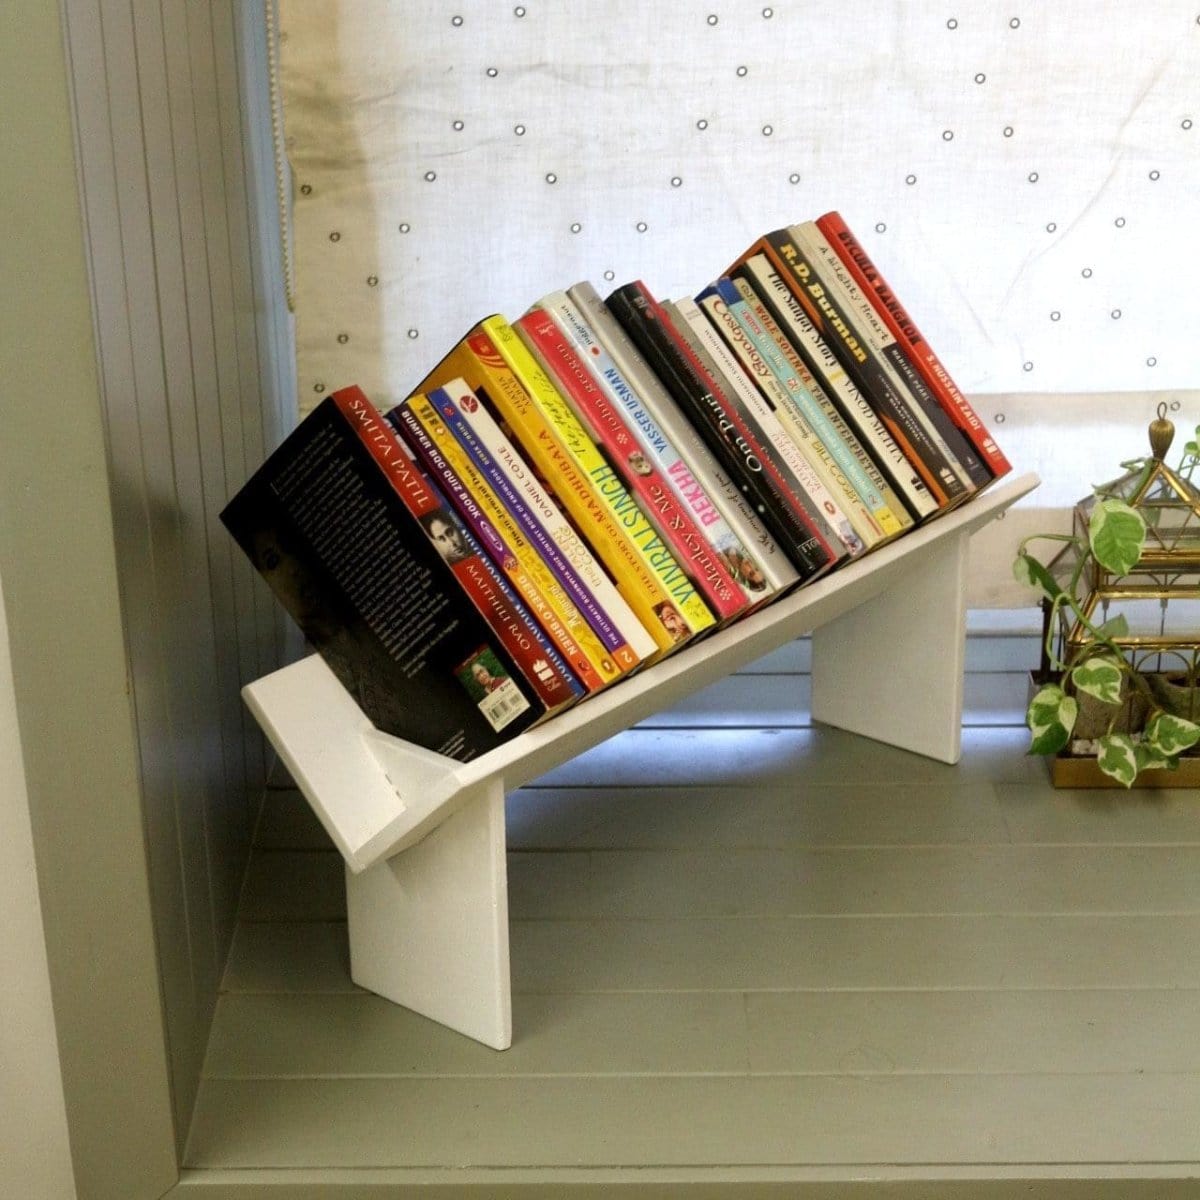 Barish Book Rack (Table Top) White BH0016WE Best Home Decor Handcrafted